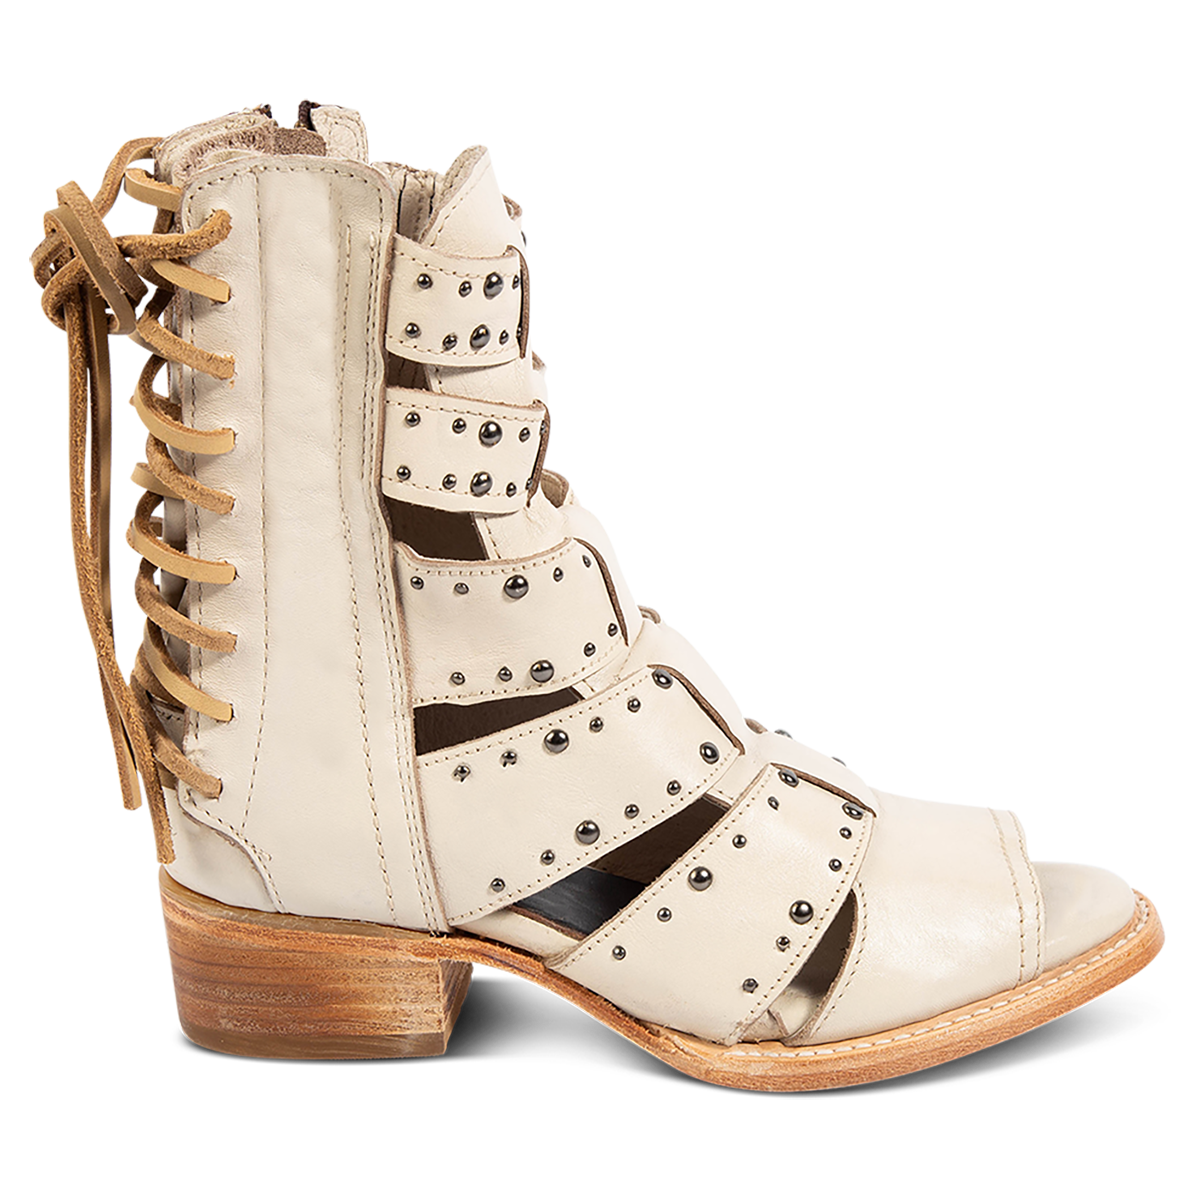 FREEBIRD women's Ghost off white leather sandal with an inside working brass zipper, back panel lacing and an exposed exterior